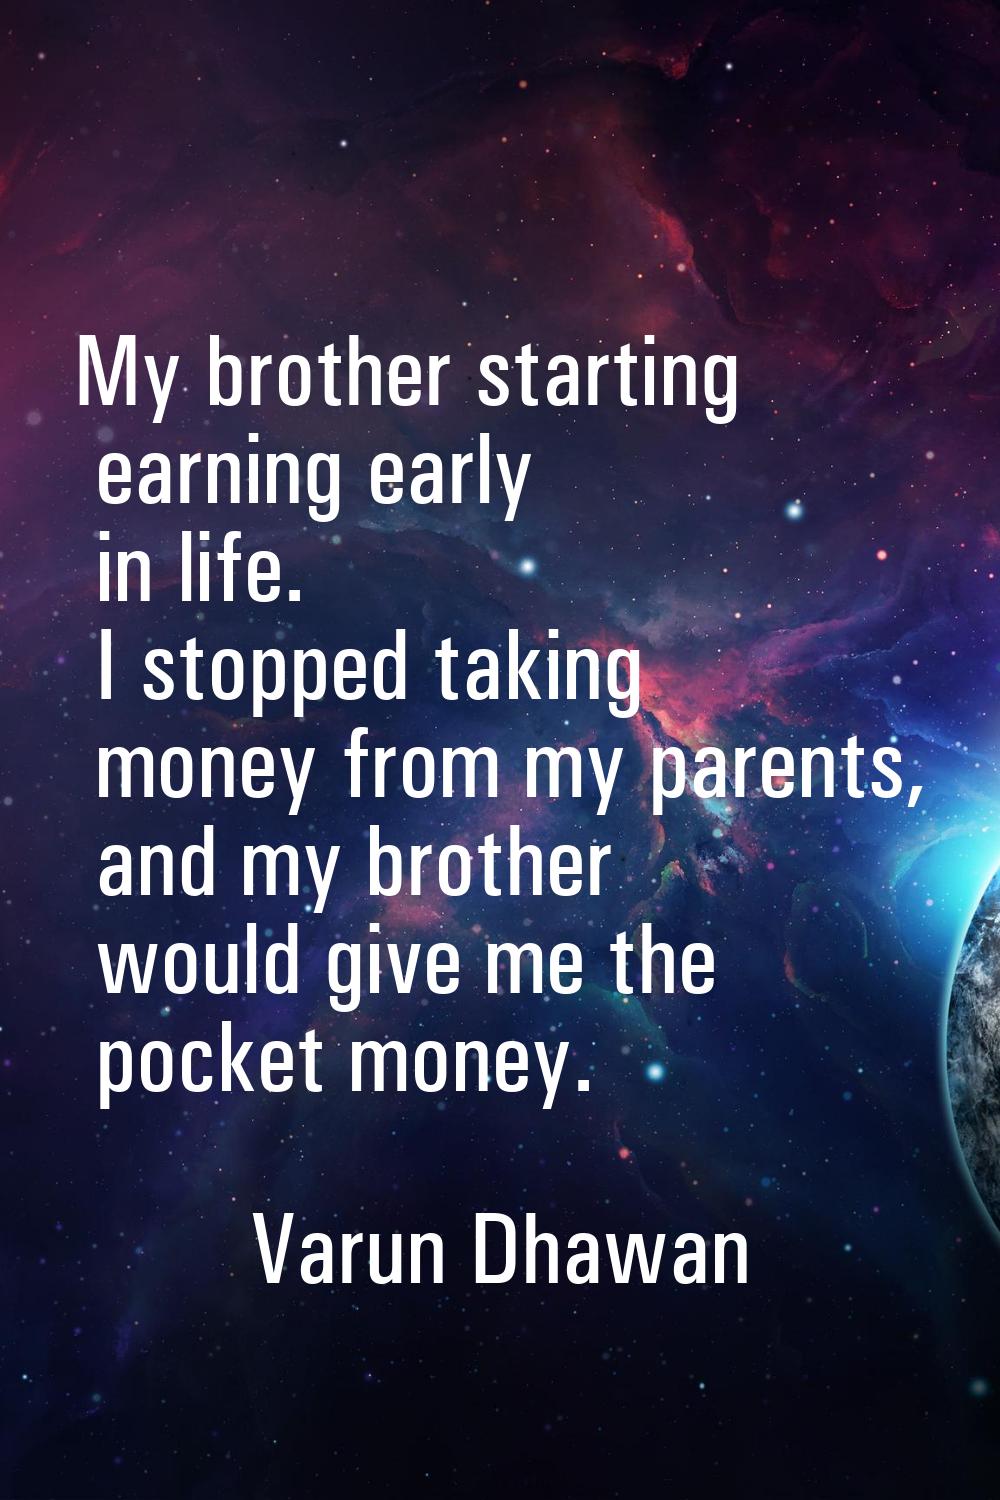 My brother starting earning early in life. I stopped taking money from my parents, and my brother w